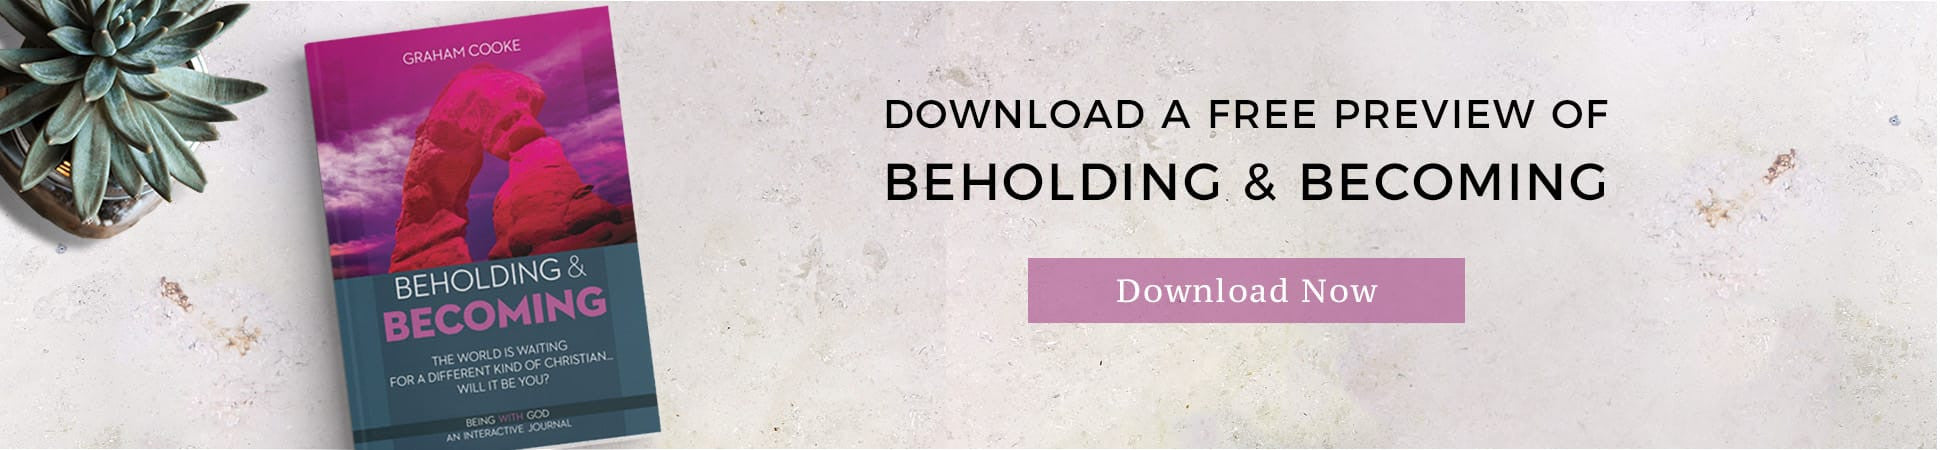 Beholding & Becoming FREE preview